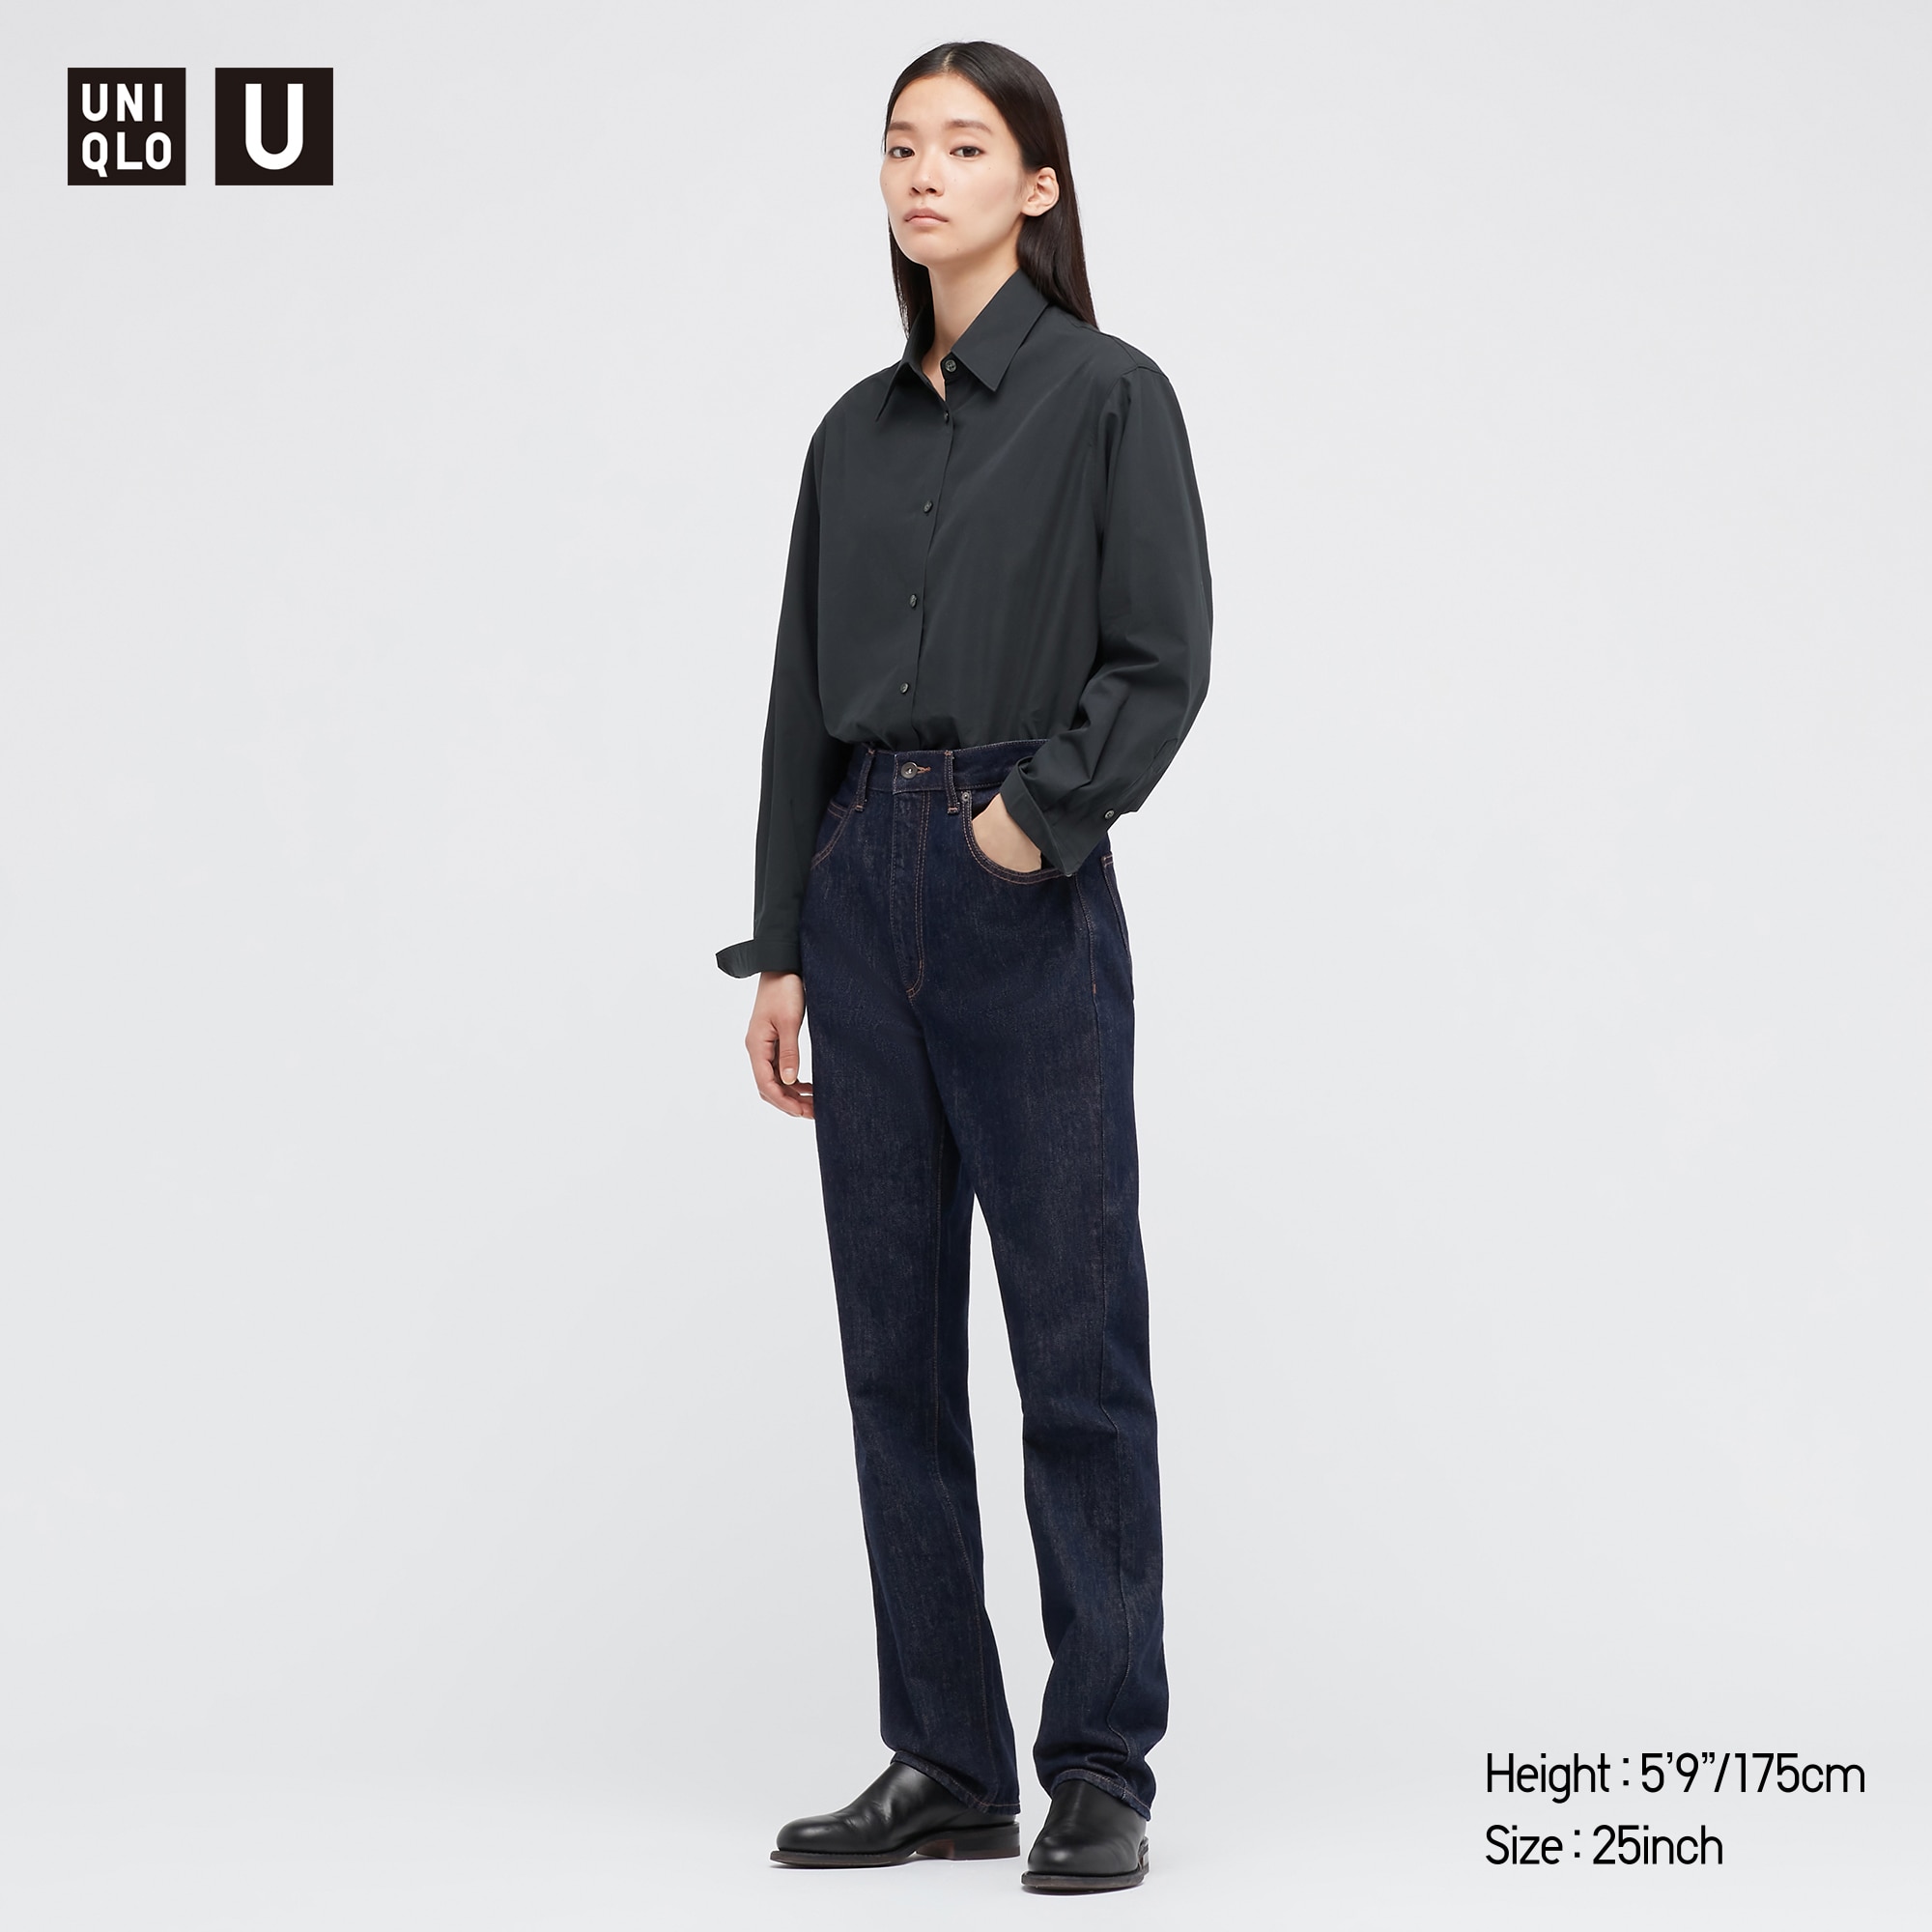 SOLD  Uniqlo U Women Regular Fit Straight Jeans  Blue Womens Fashion  Bottoms Jeans  Leggings on Carousell